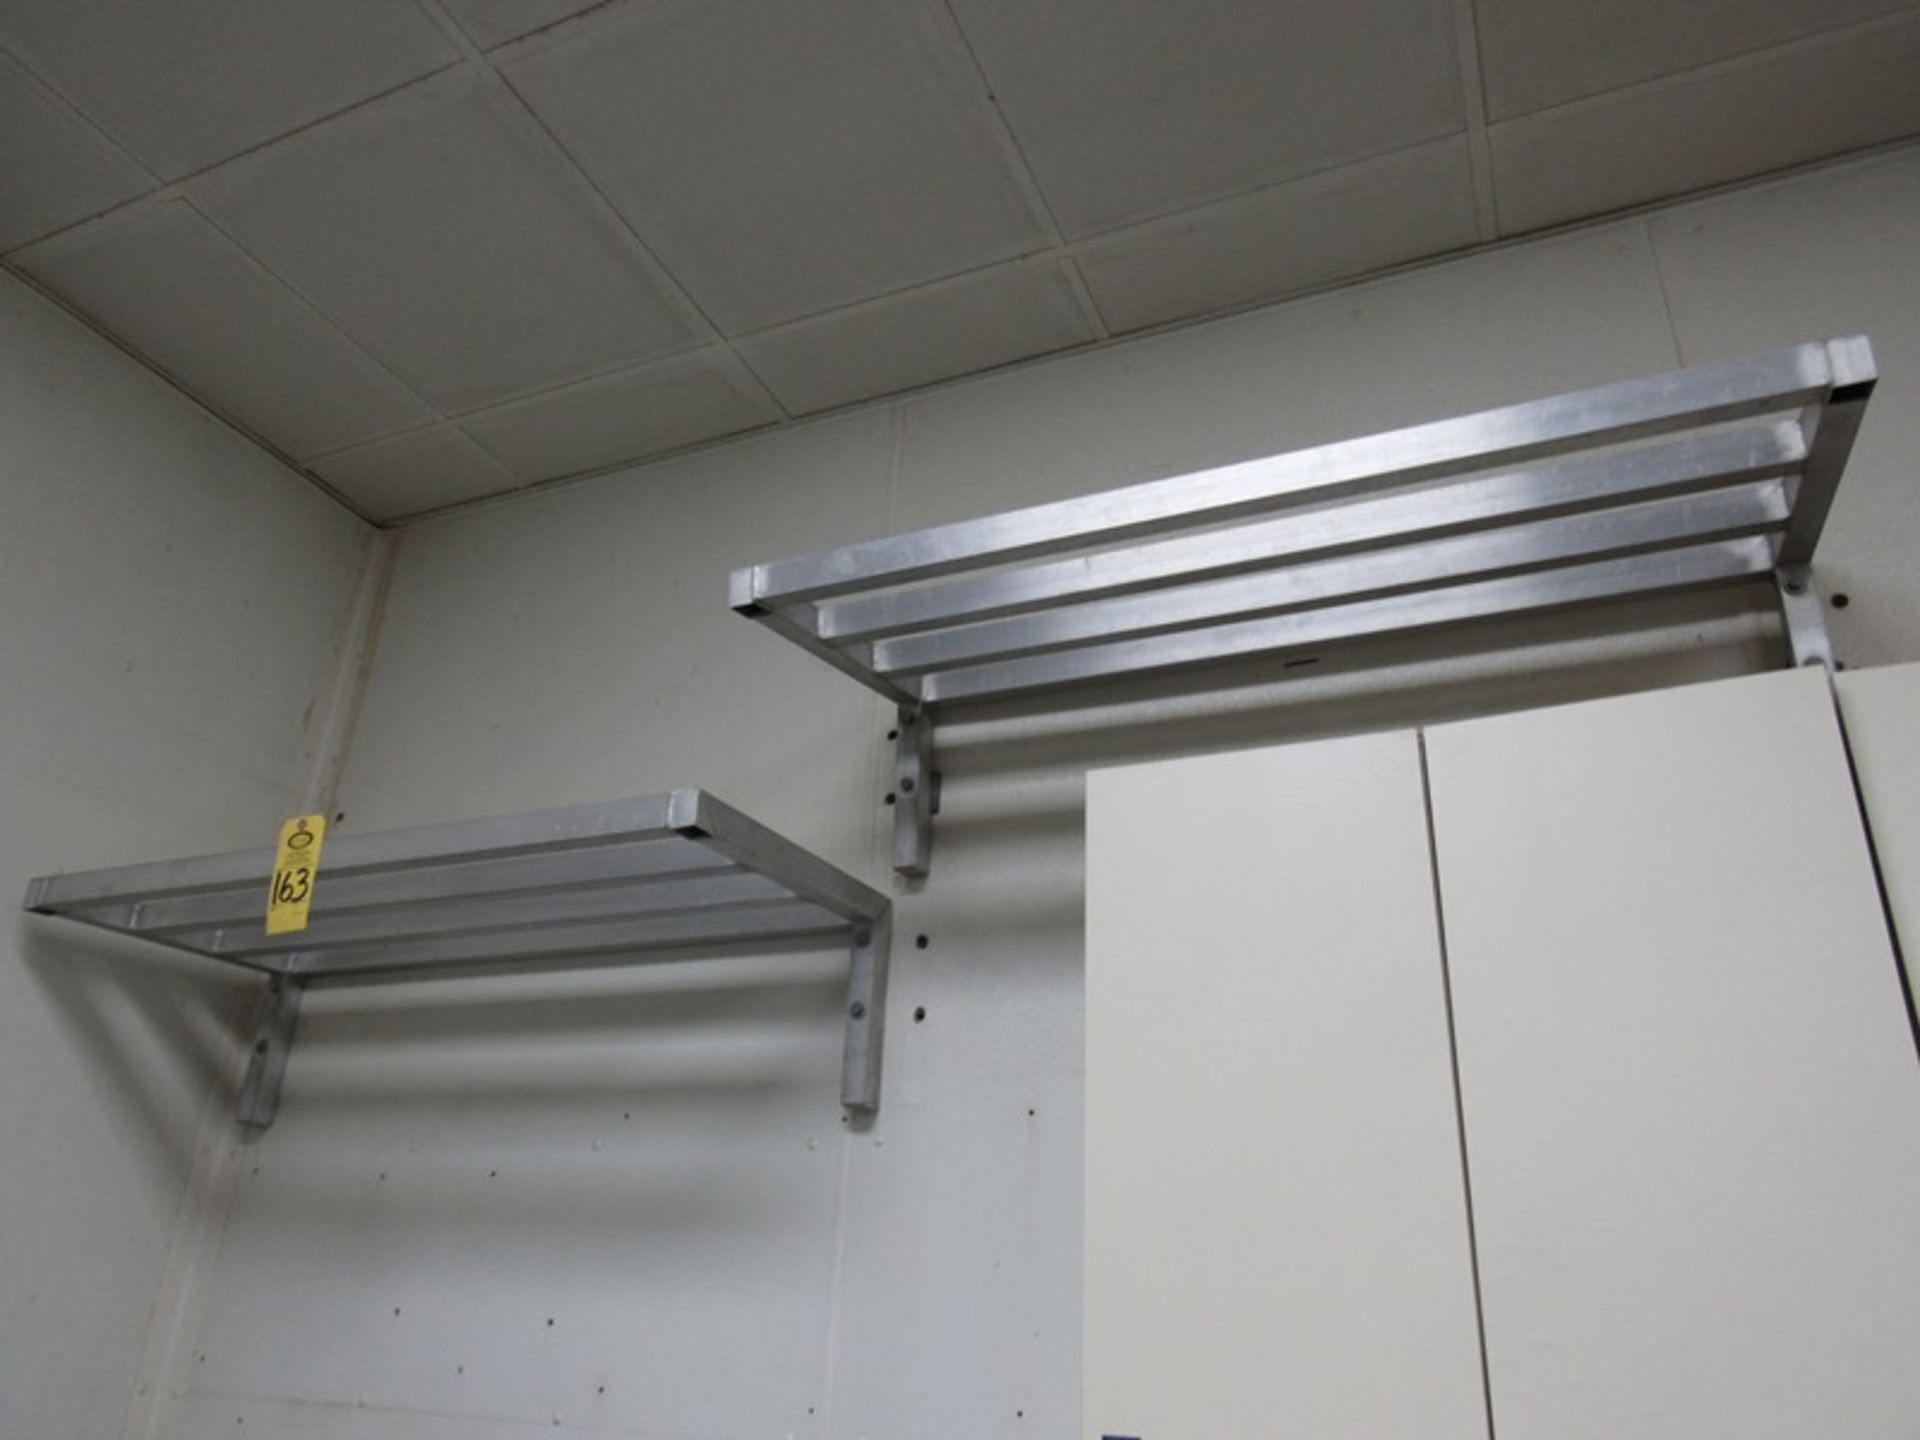 Lot (4) Aluminum Shelves, 22" W X 4' L (Required Loading Fee $20.00 - Small Items Will Be Loaded